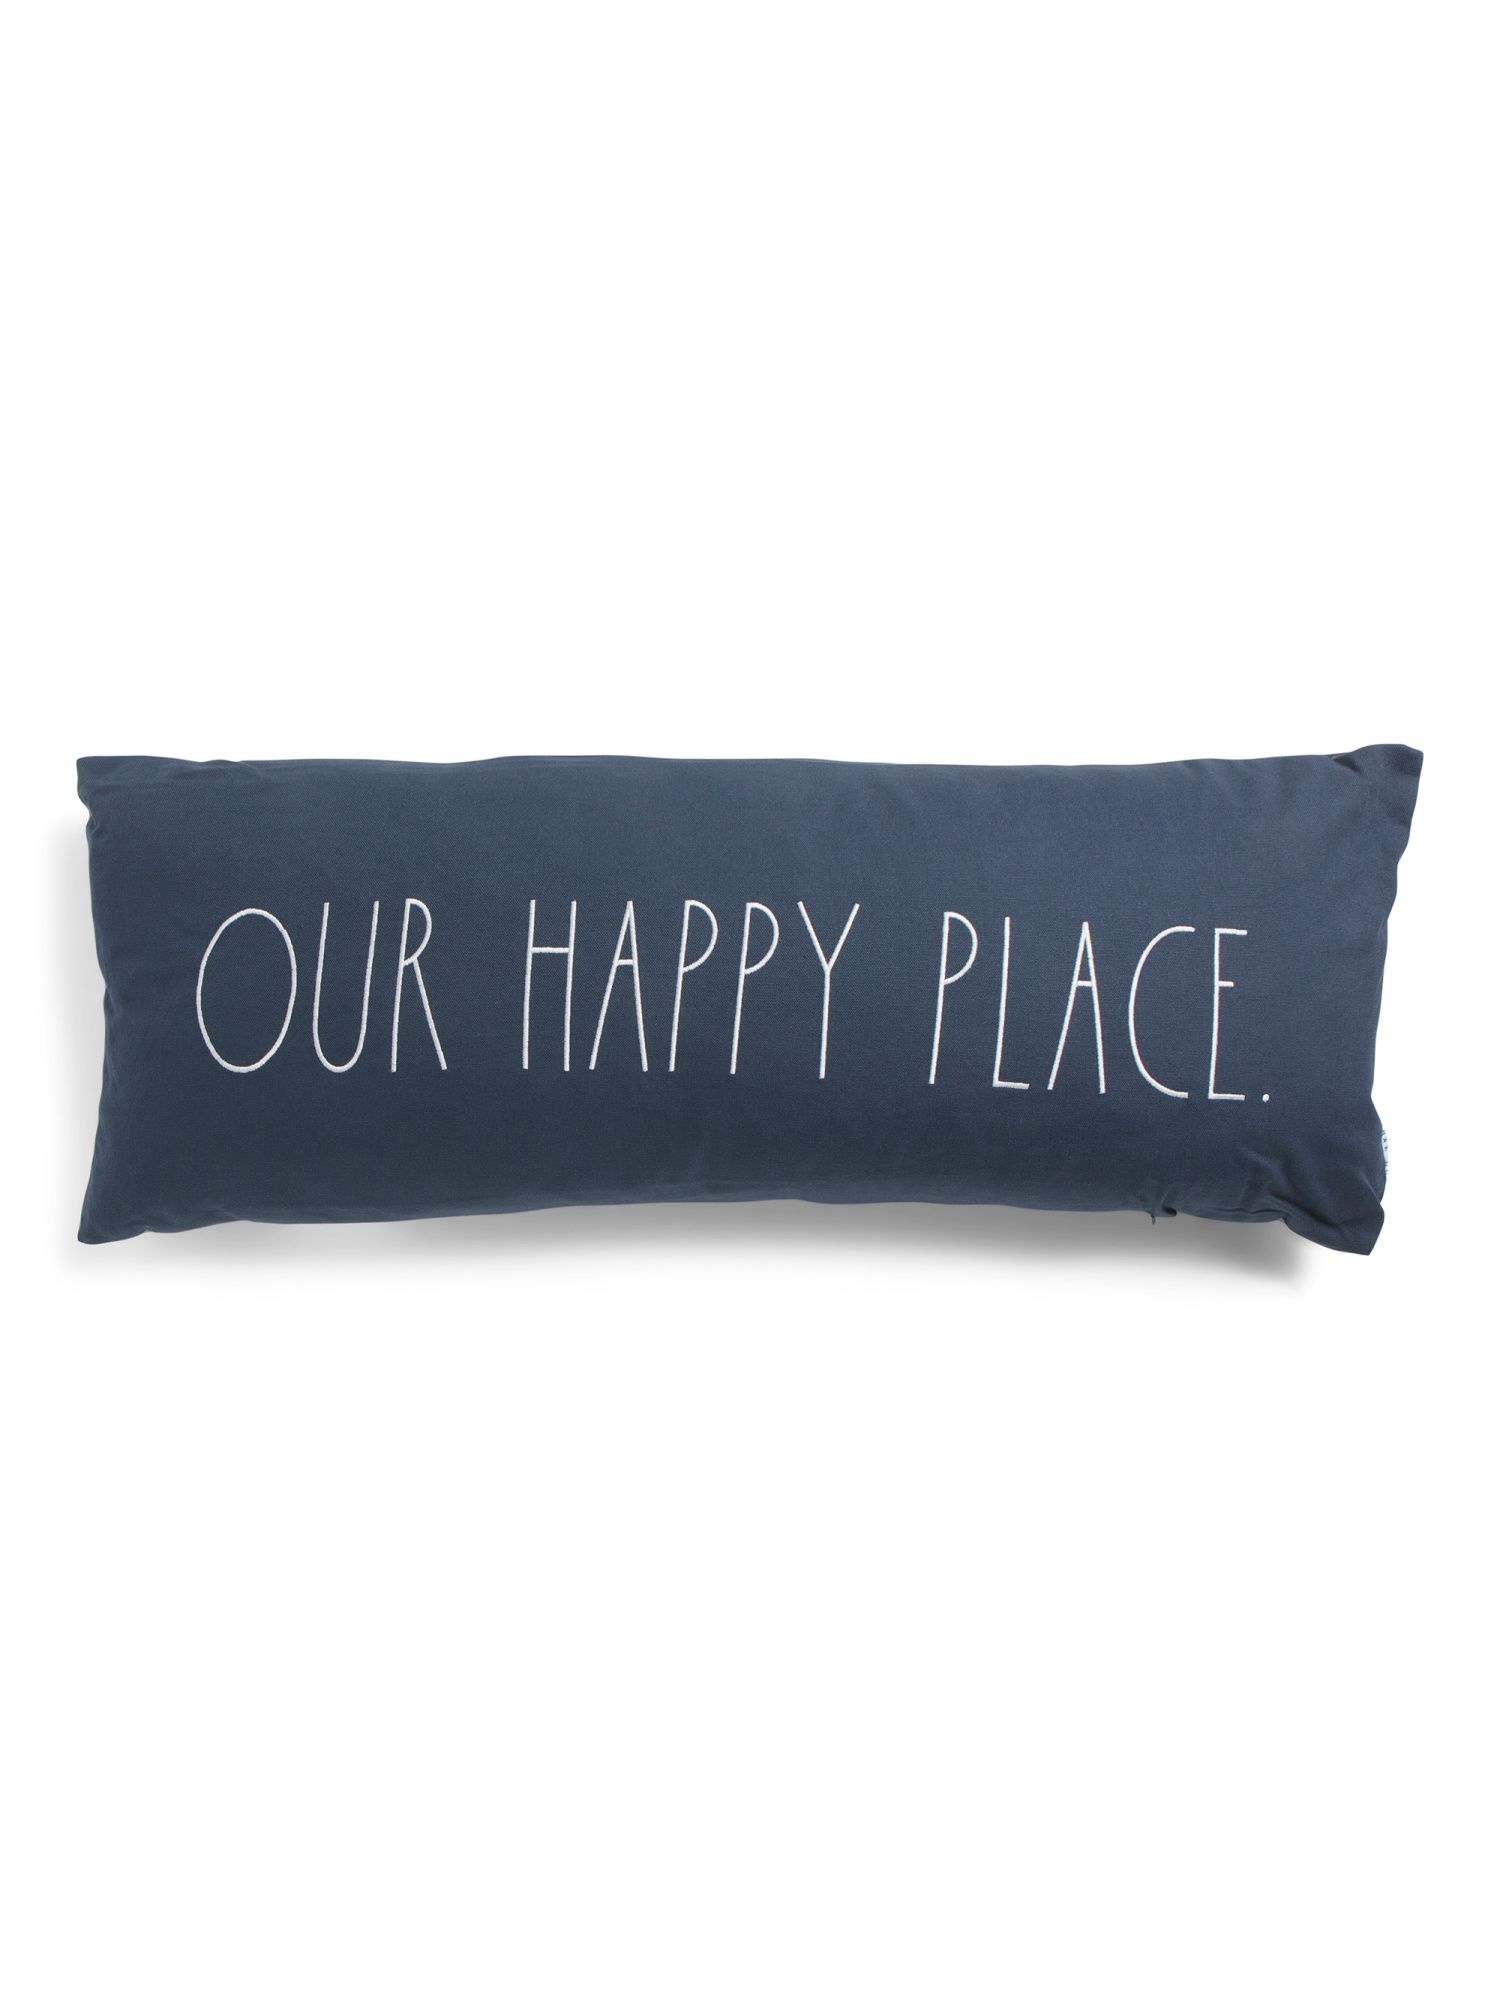 14x35 Our Happy Place Pillow | Marshalls